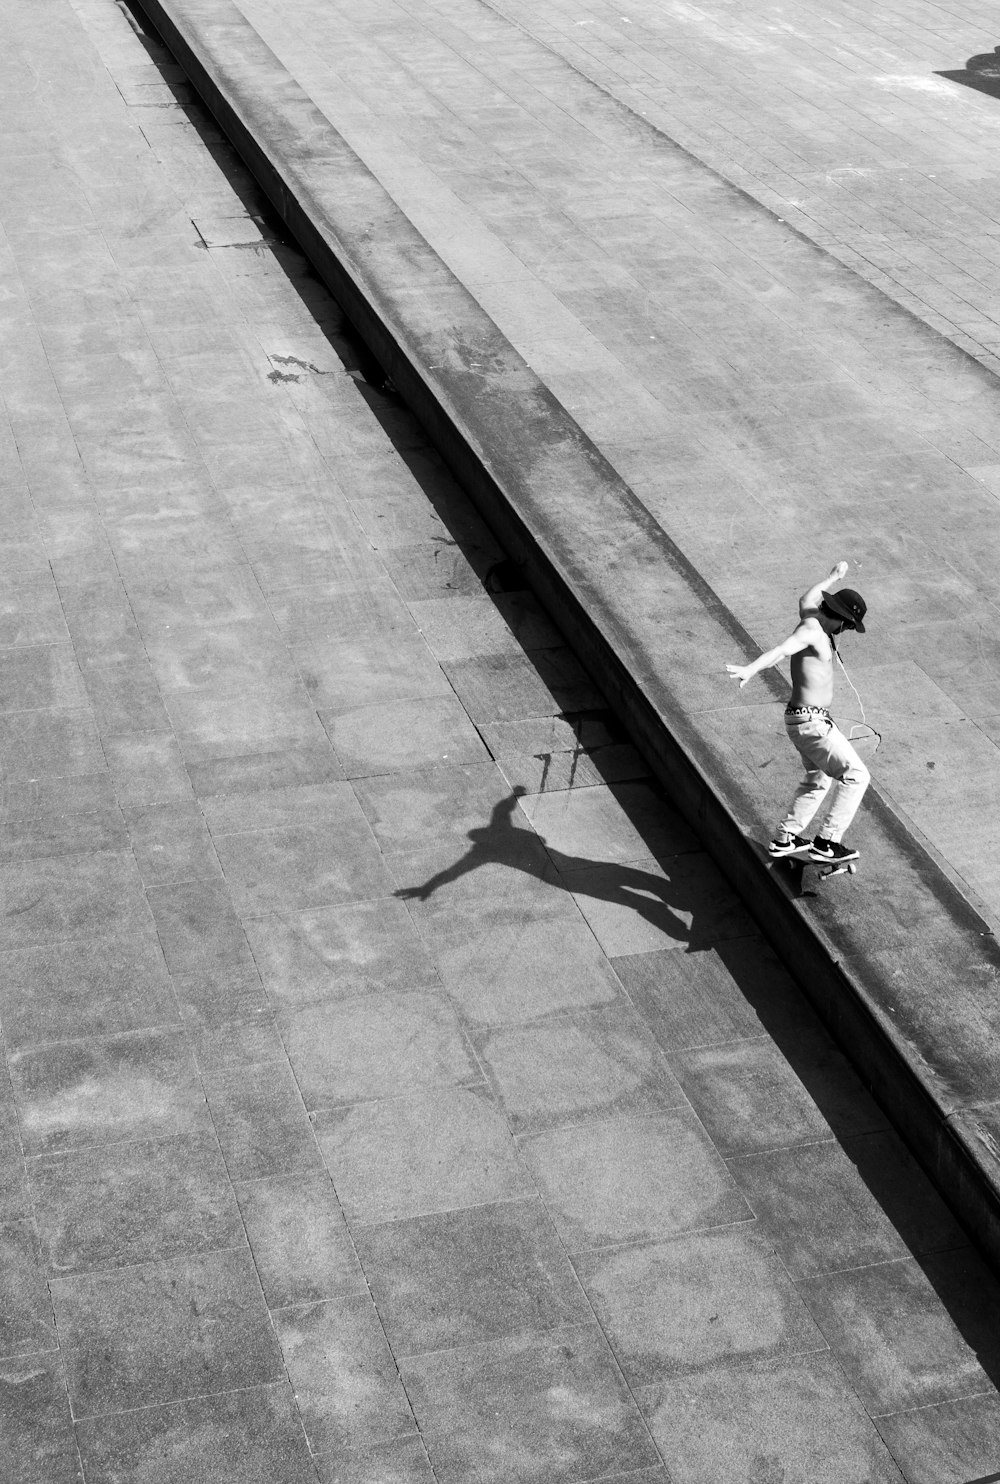 man in white shirt and pants playing skateboard on gray concrete pavement